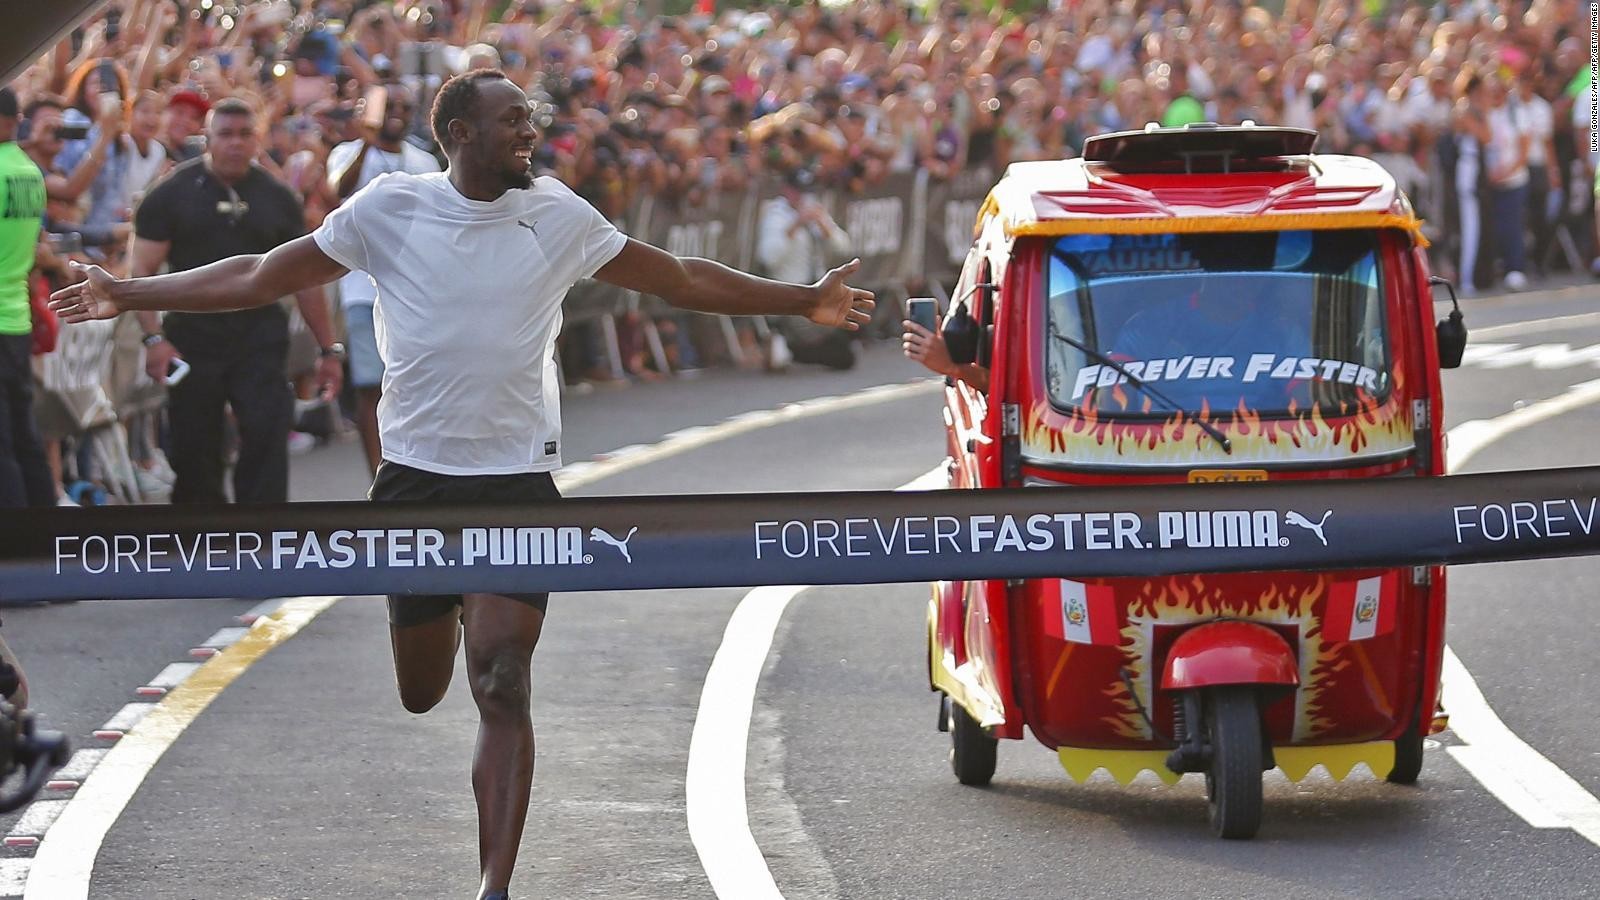 Eight-time Olympic gold medallist Usain Bolt competed against a tuk-tuk in the Peruvian capital Lima on Tuesday, and won